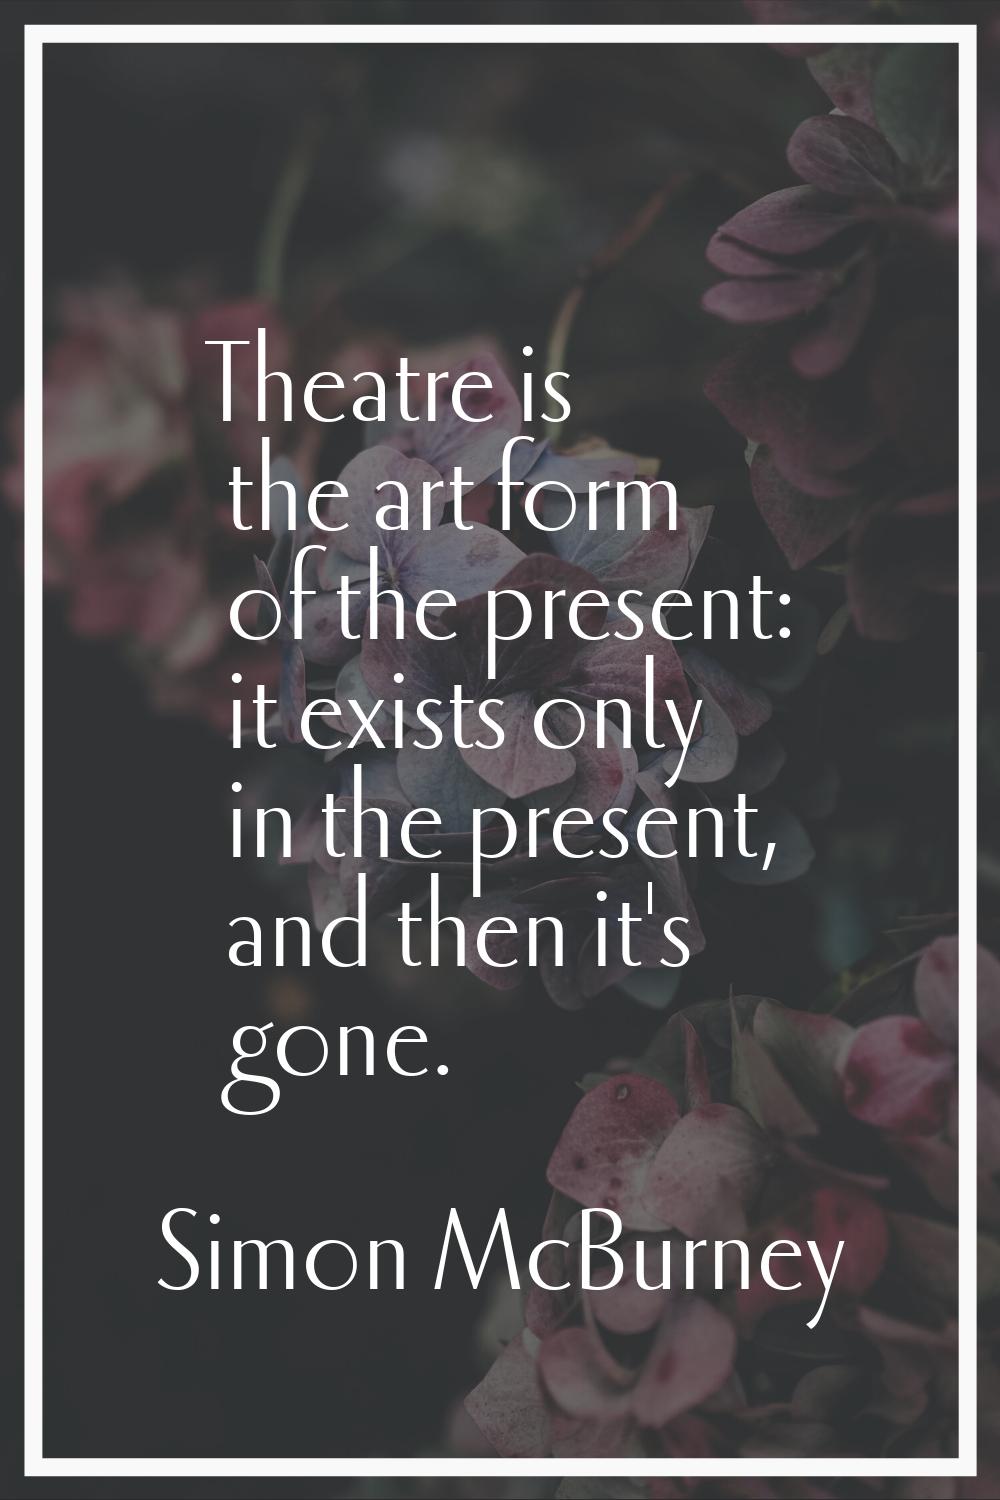 Theatre is the art form of the present: it exists only in the present, and then it's gone.